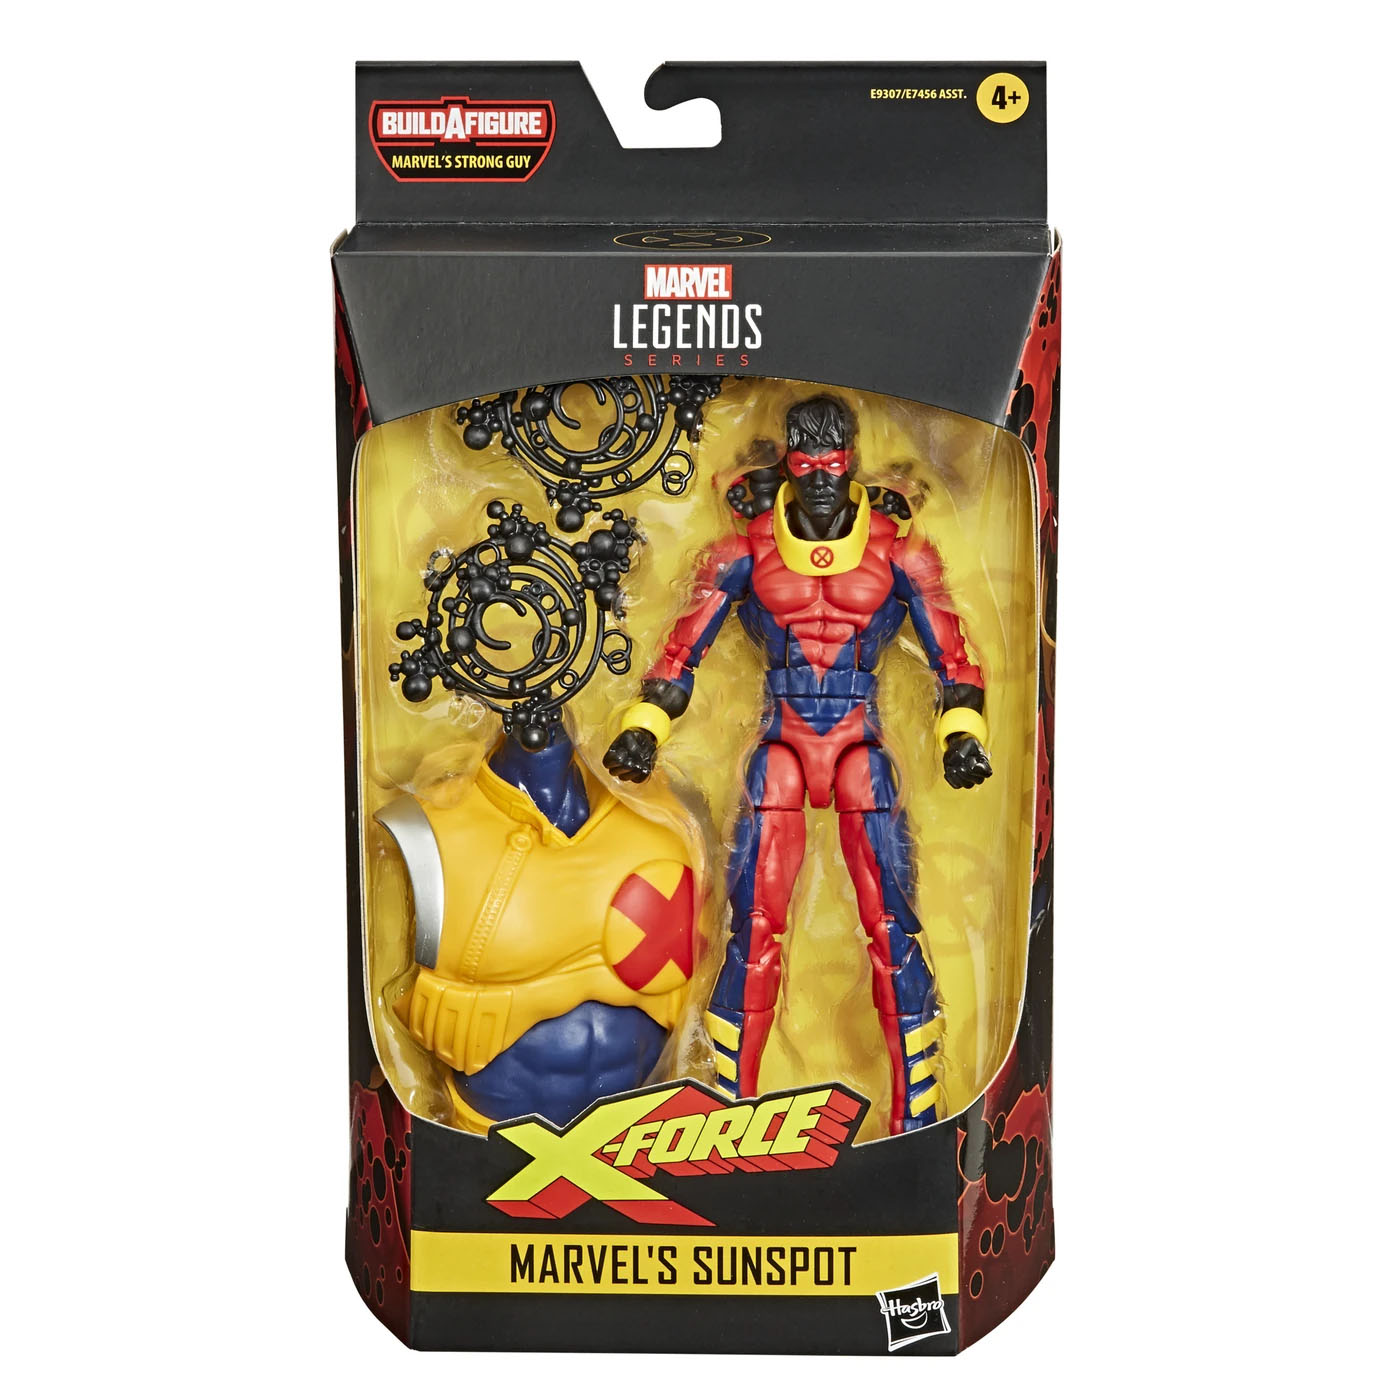 where can i buy marvel legends